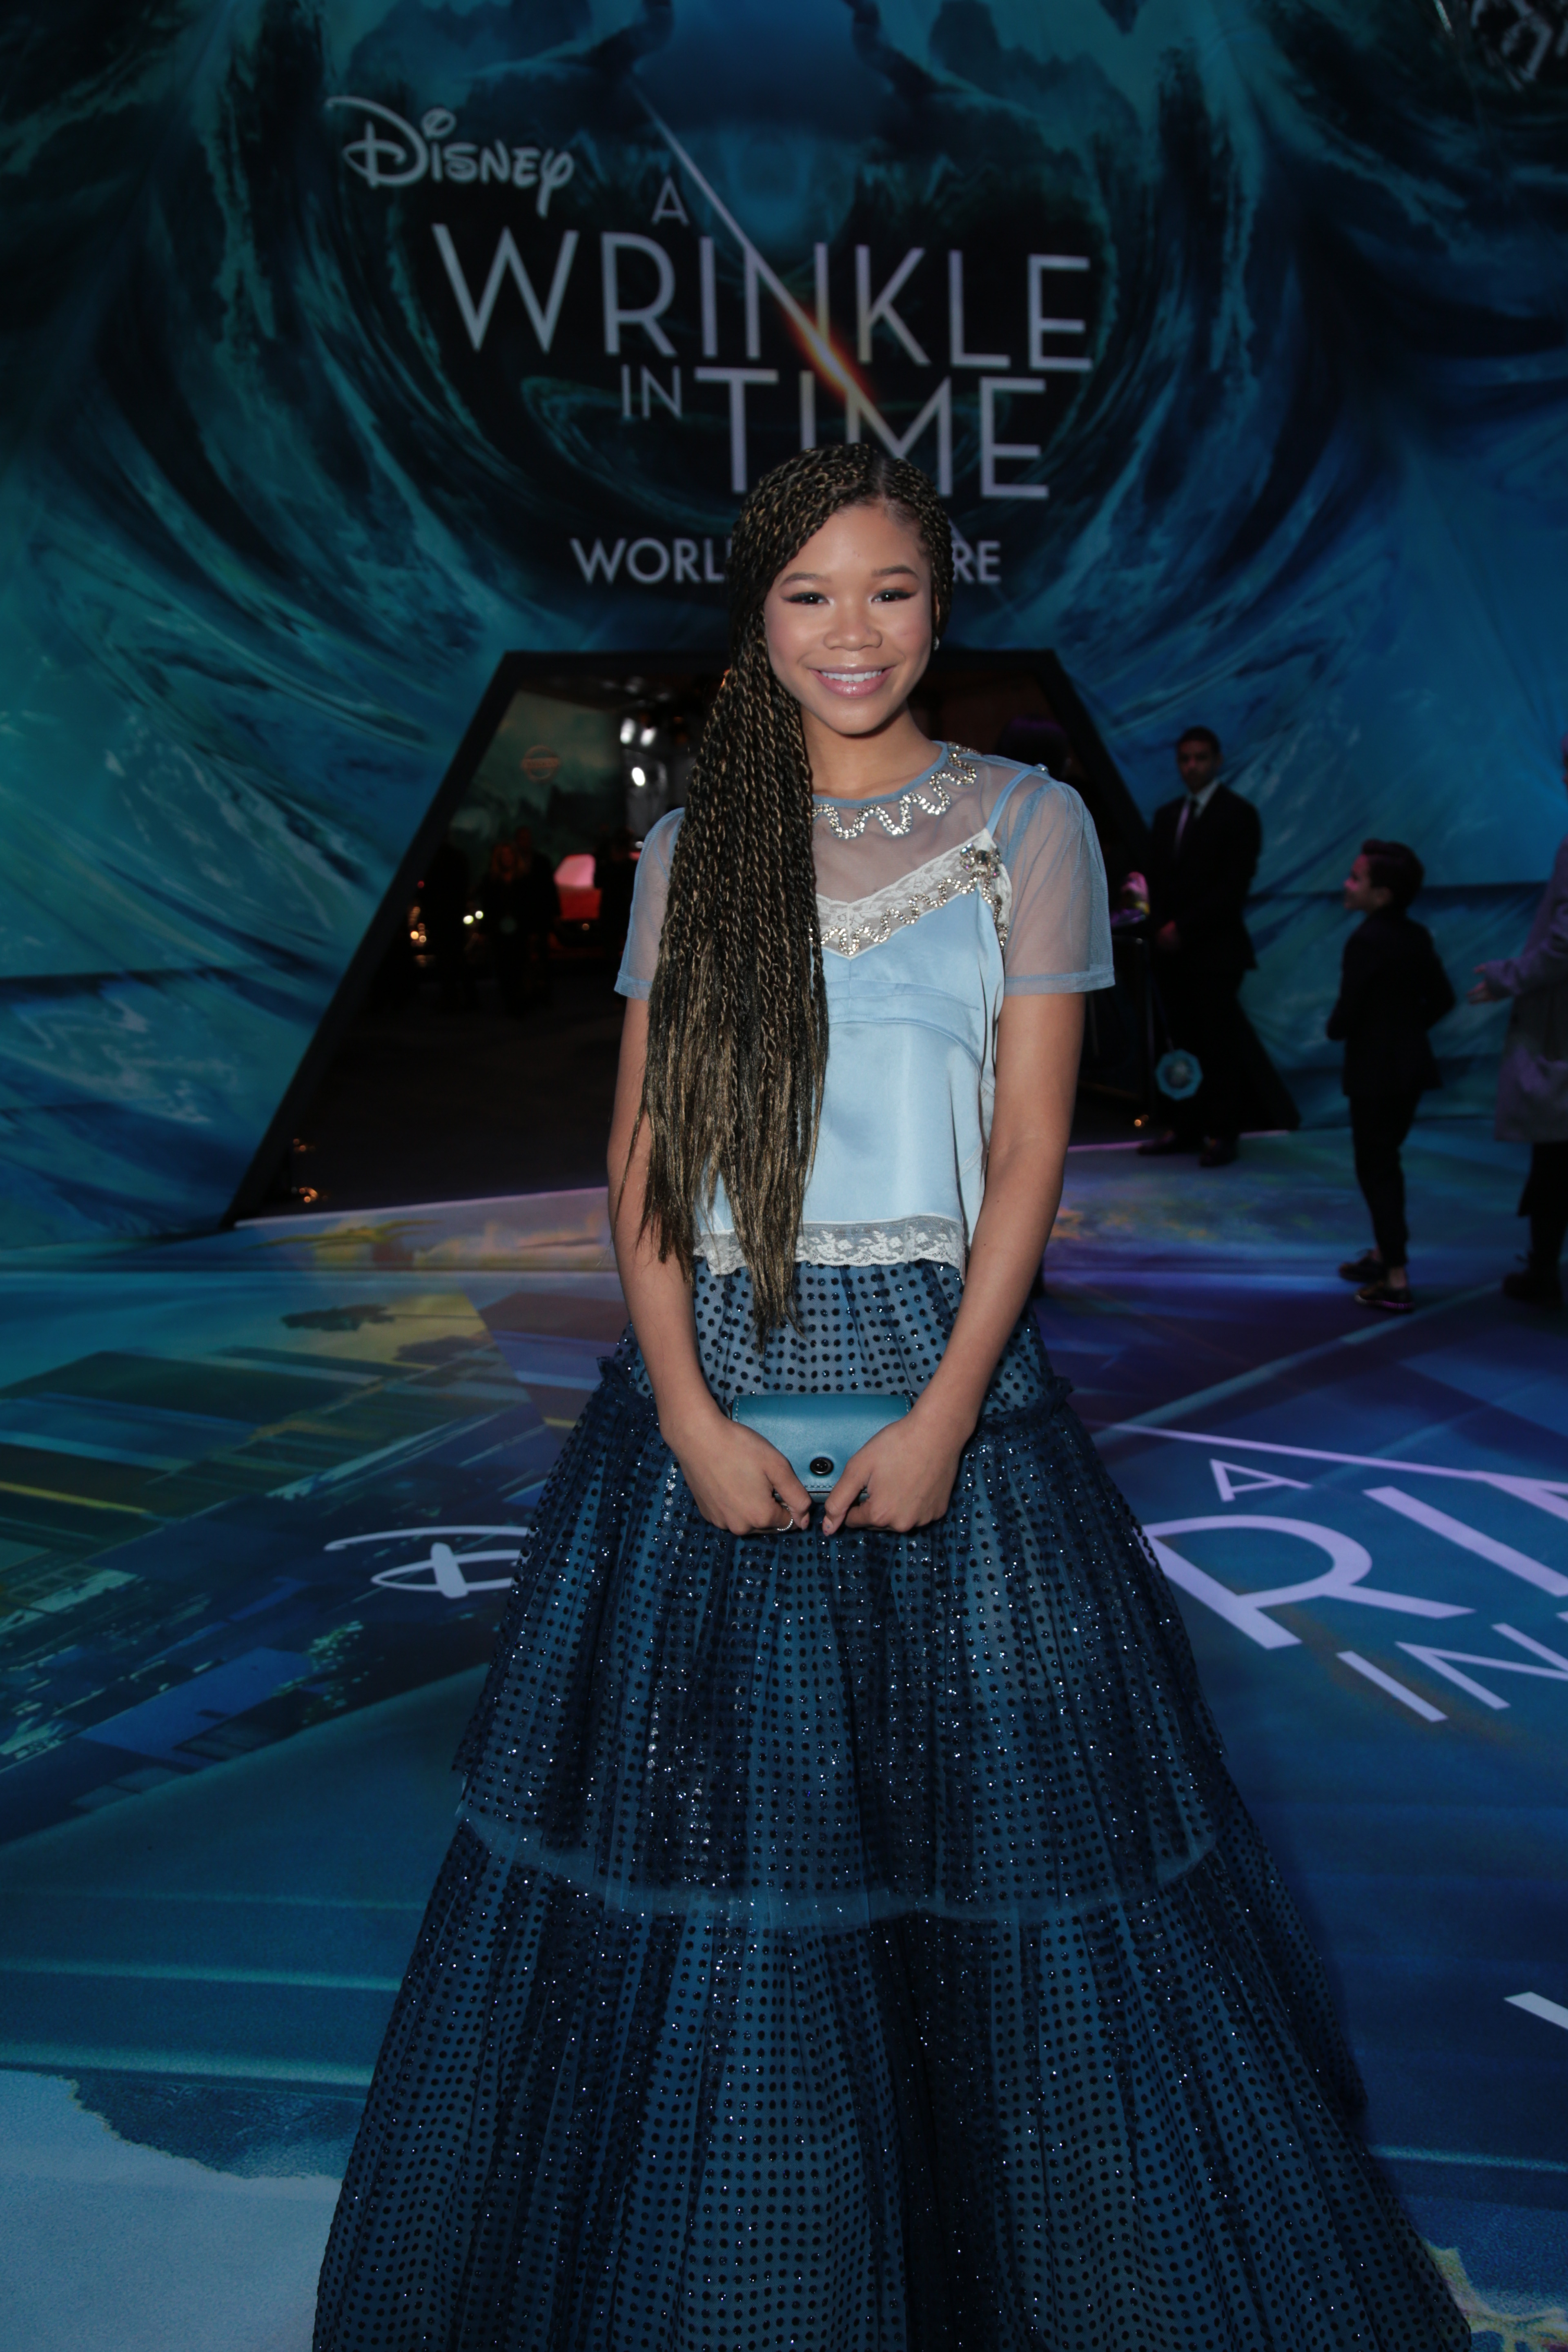 Storm Reid Is Going To Impact Young Girls Everywhere With A Wrinkle In Time